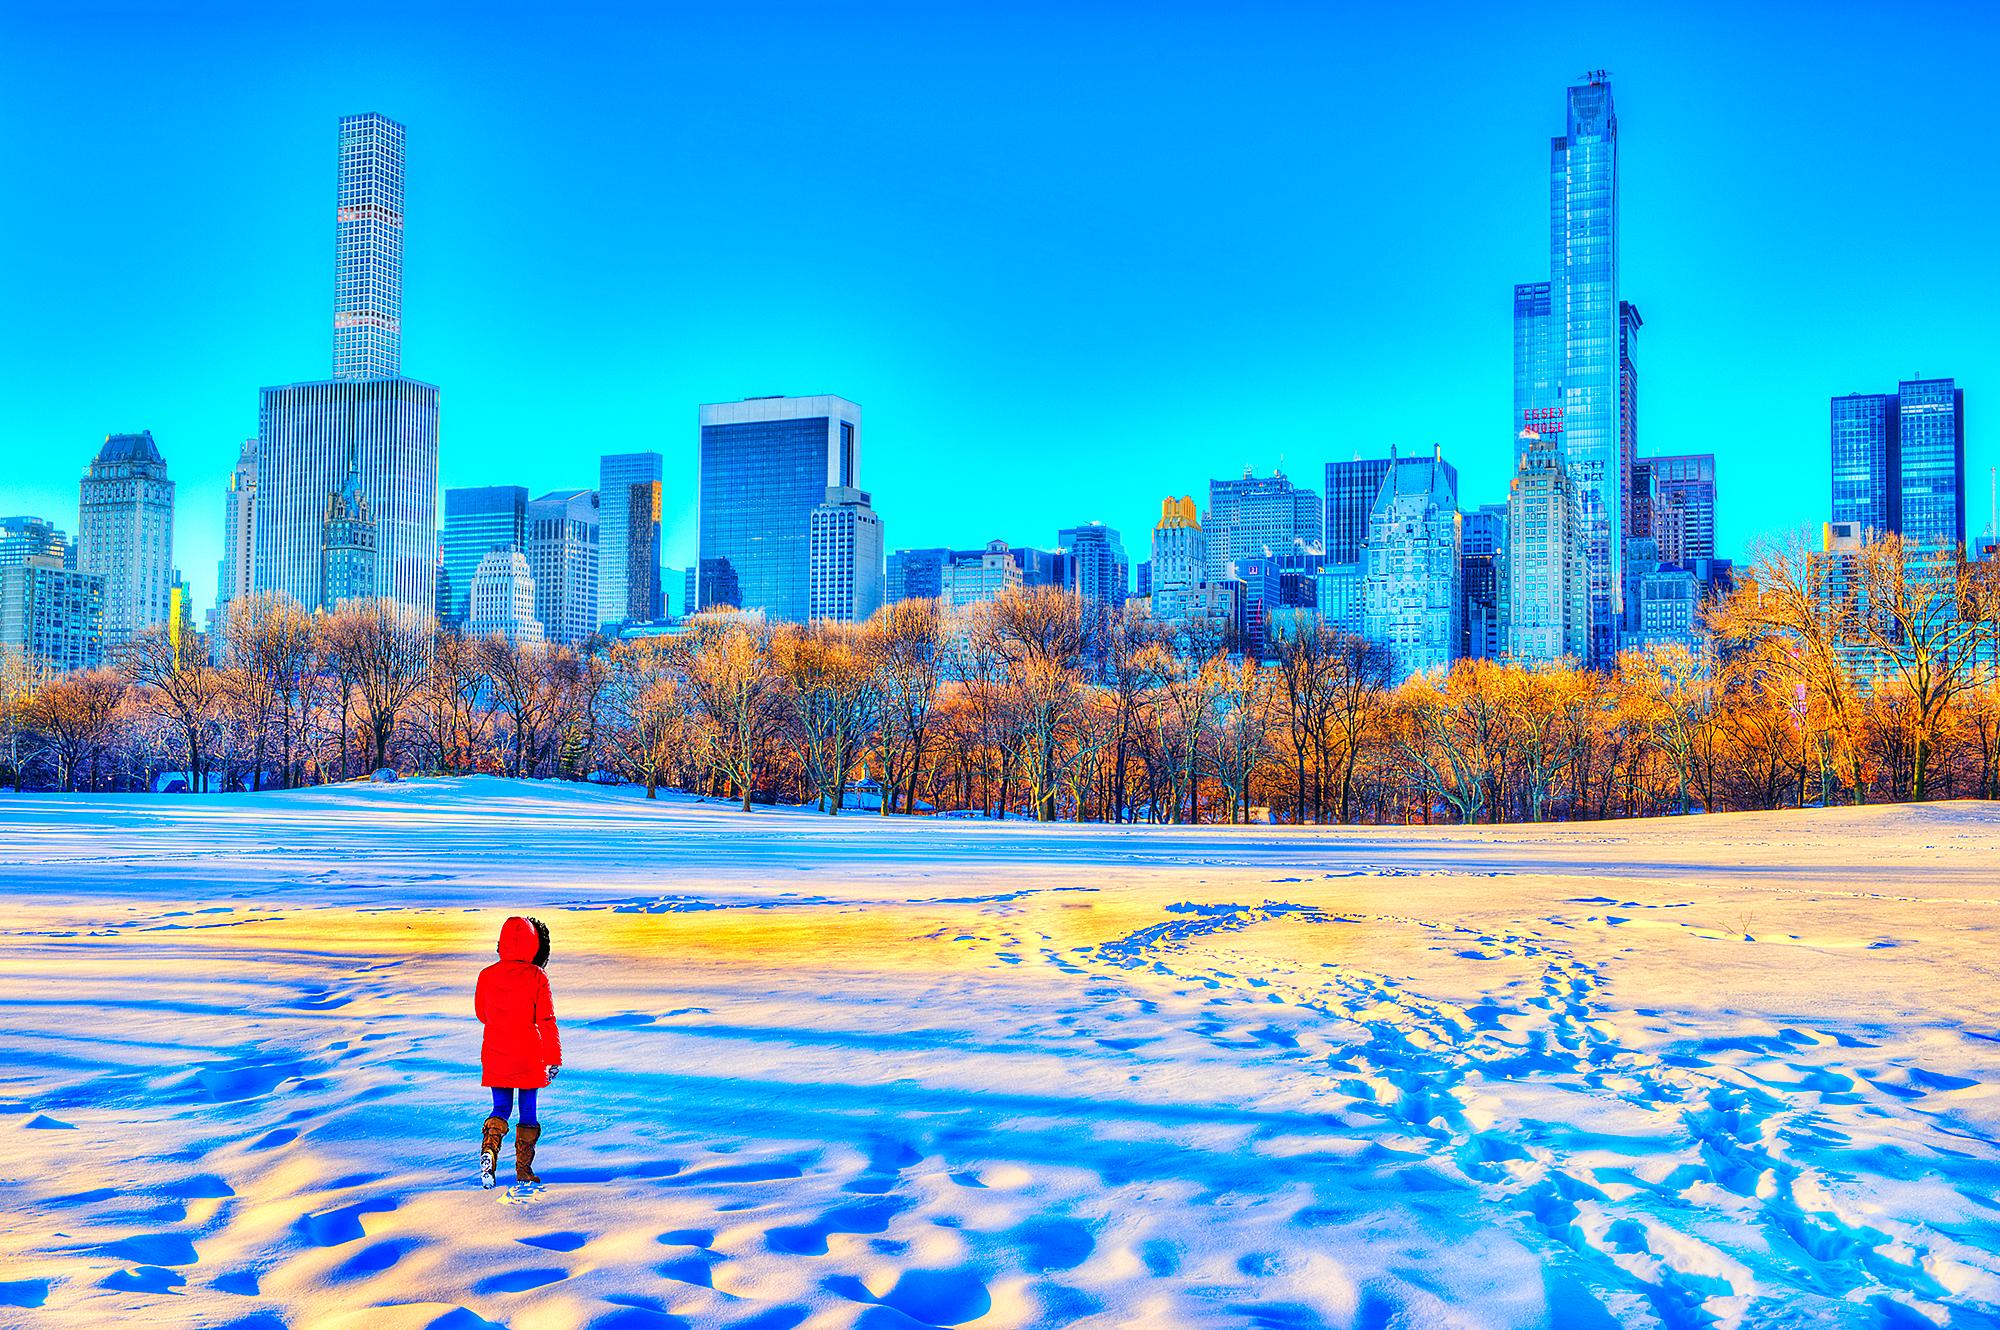 Warm Light Of Sunrise After Snowstorm In Central Park, New York City